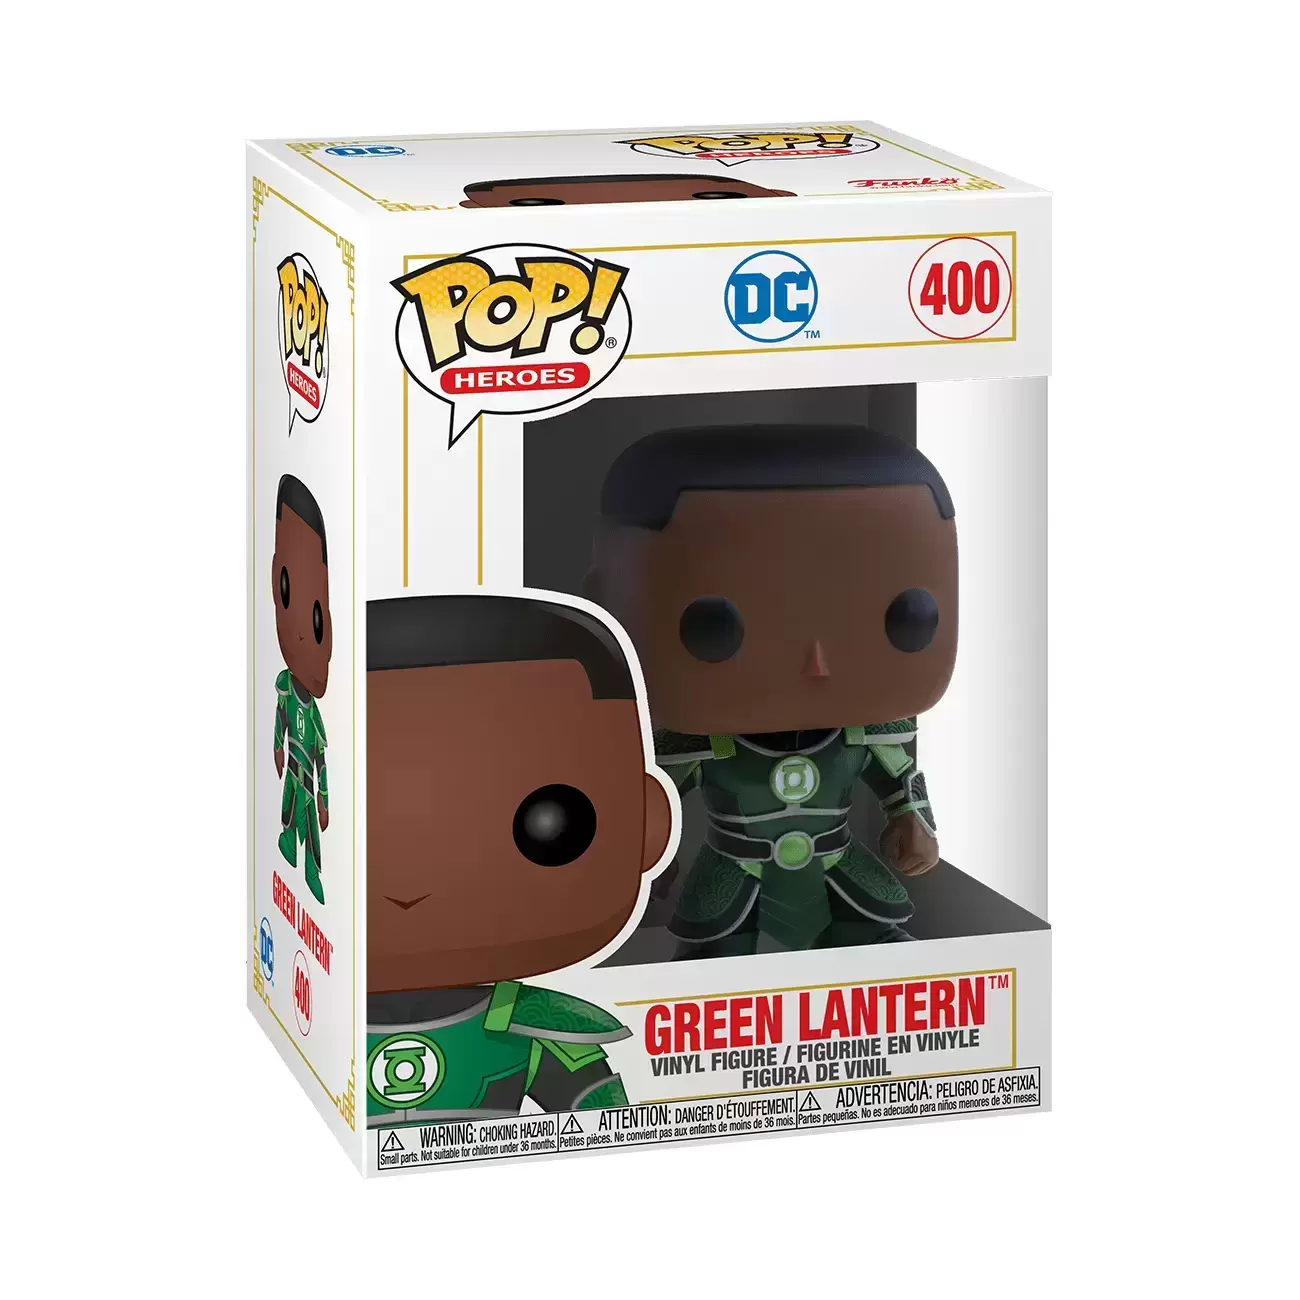 POP! Heroes - DC Comics - Imperial Palace Green Lantern